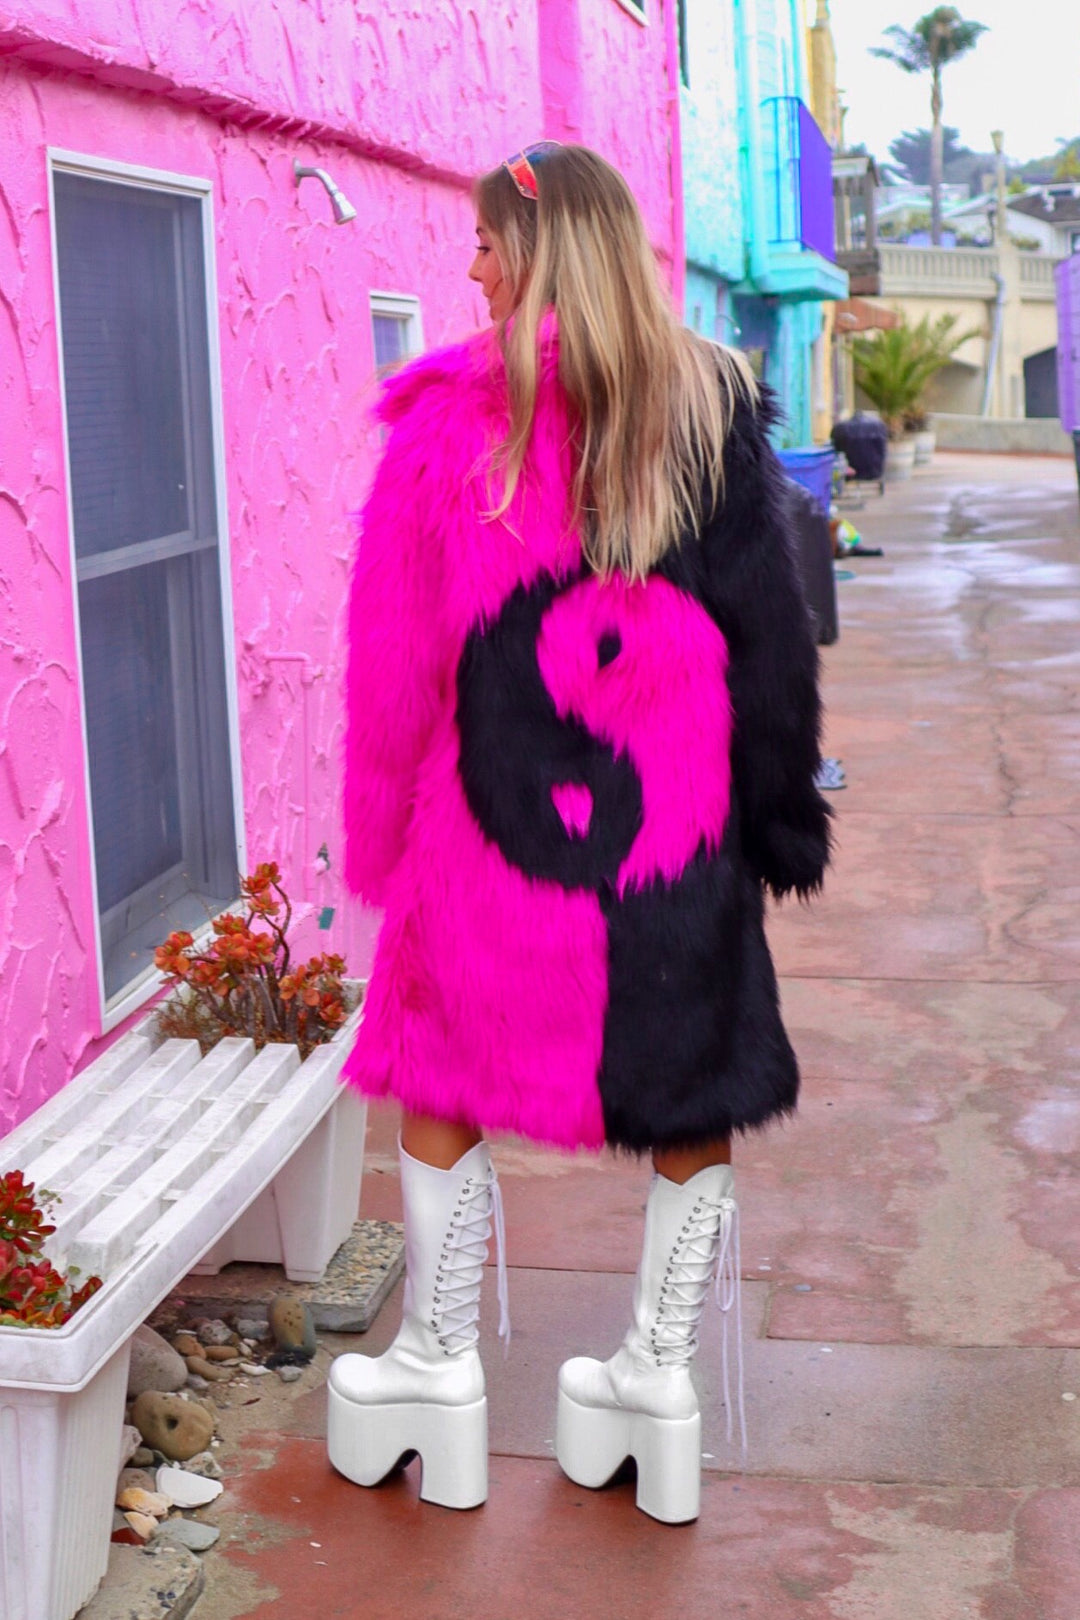 Yin Yang coat black and pink faux fur by Space island. Shop area 51 alien face coat, Yin yang black and white coats, rainbow neon fur coats. Spvce Island is a wearable art collective featuring festival fashion, rave wear, club wear and streetwear. Buy coats, jackets, platform boots, gogo boots, rainbow platform sneakers, holographic sandals, shoes, burning man goggles, crystal chokers, holographic corsets, joggers, rave bottoms, bikinis, harnesses, bondage and more.  